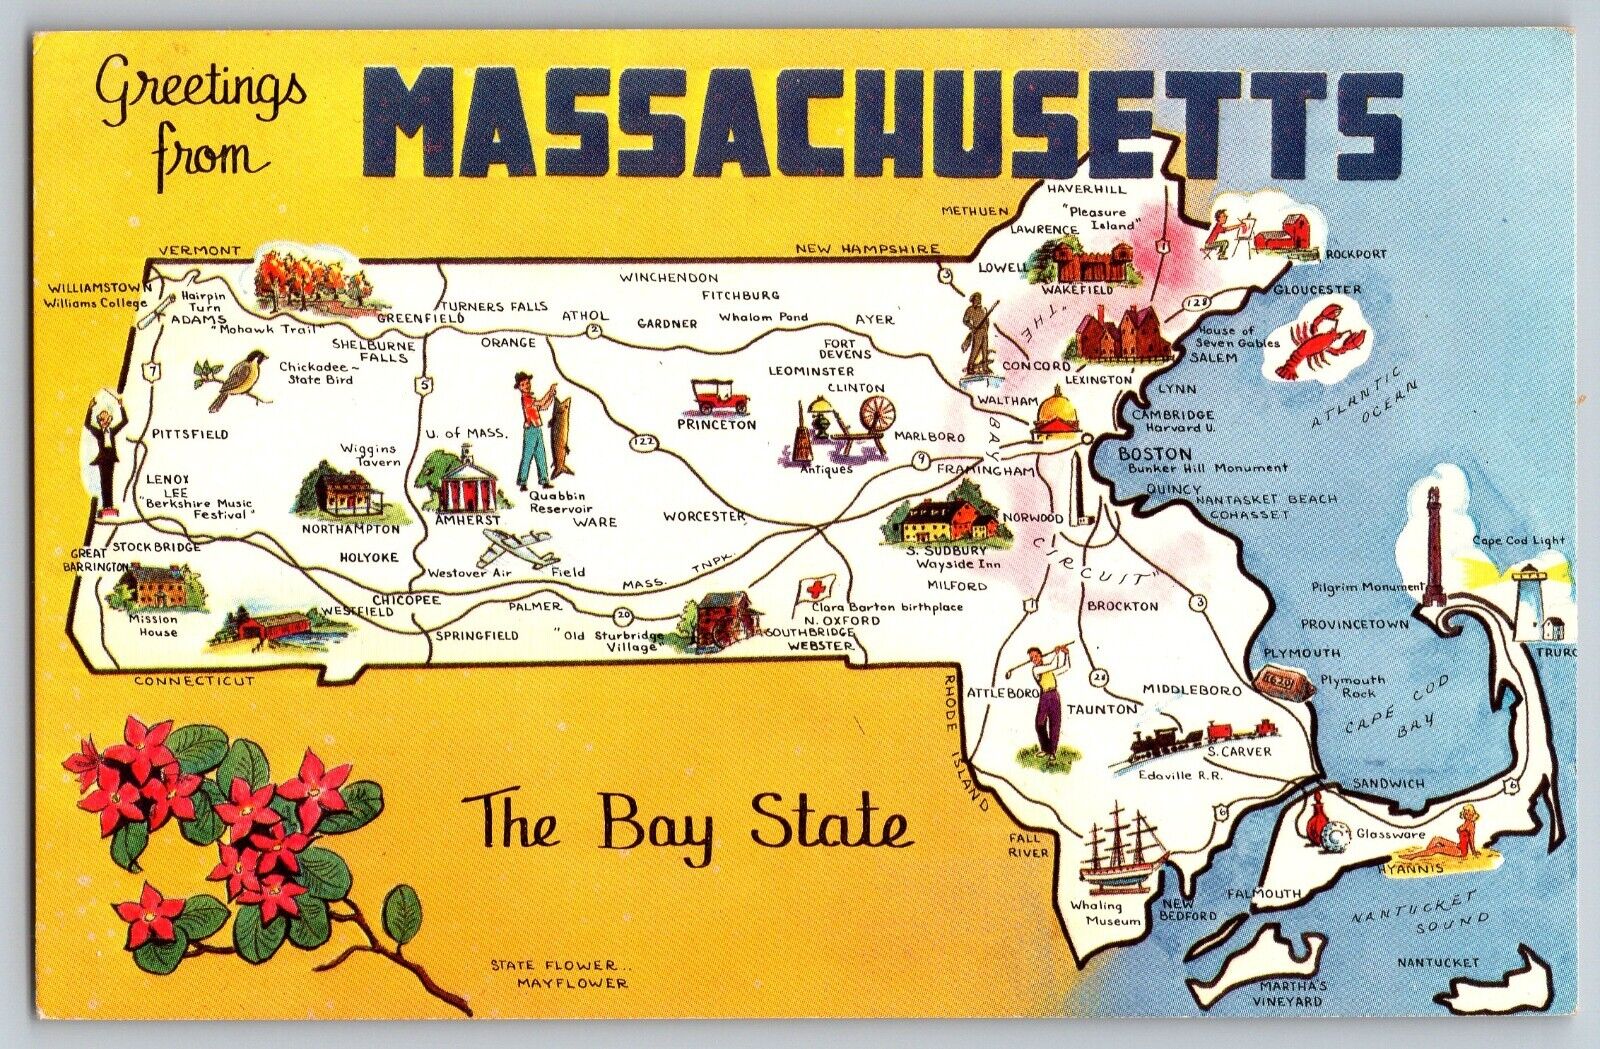 Massachusetts MA - Greetings - The Bay State, Old Colony - Vintage Postcard